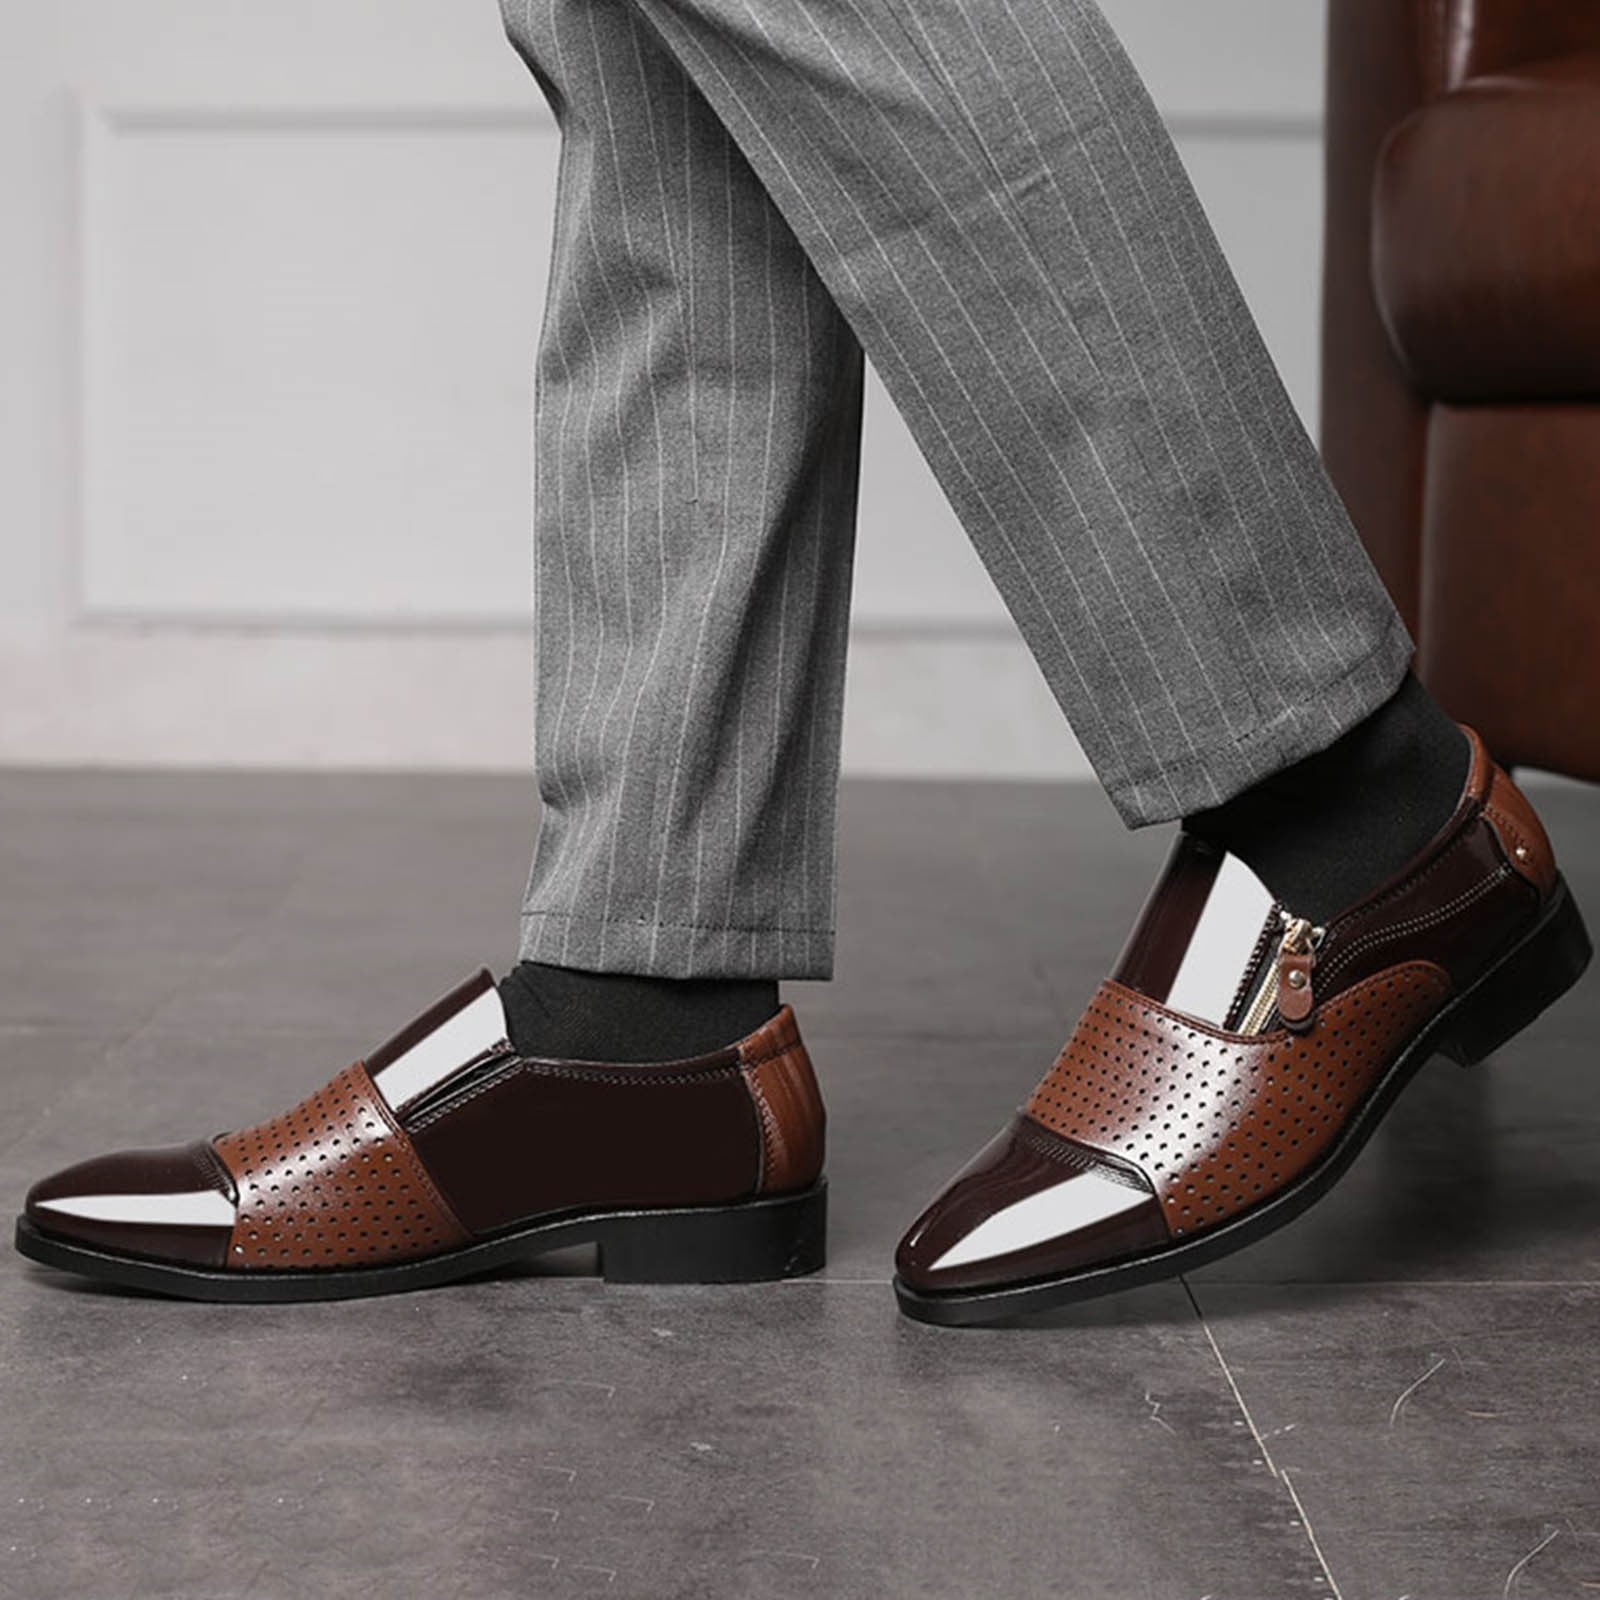 mens causal dress shoes